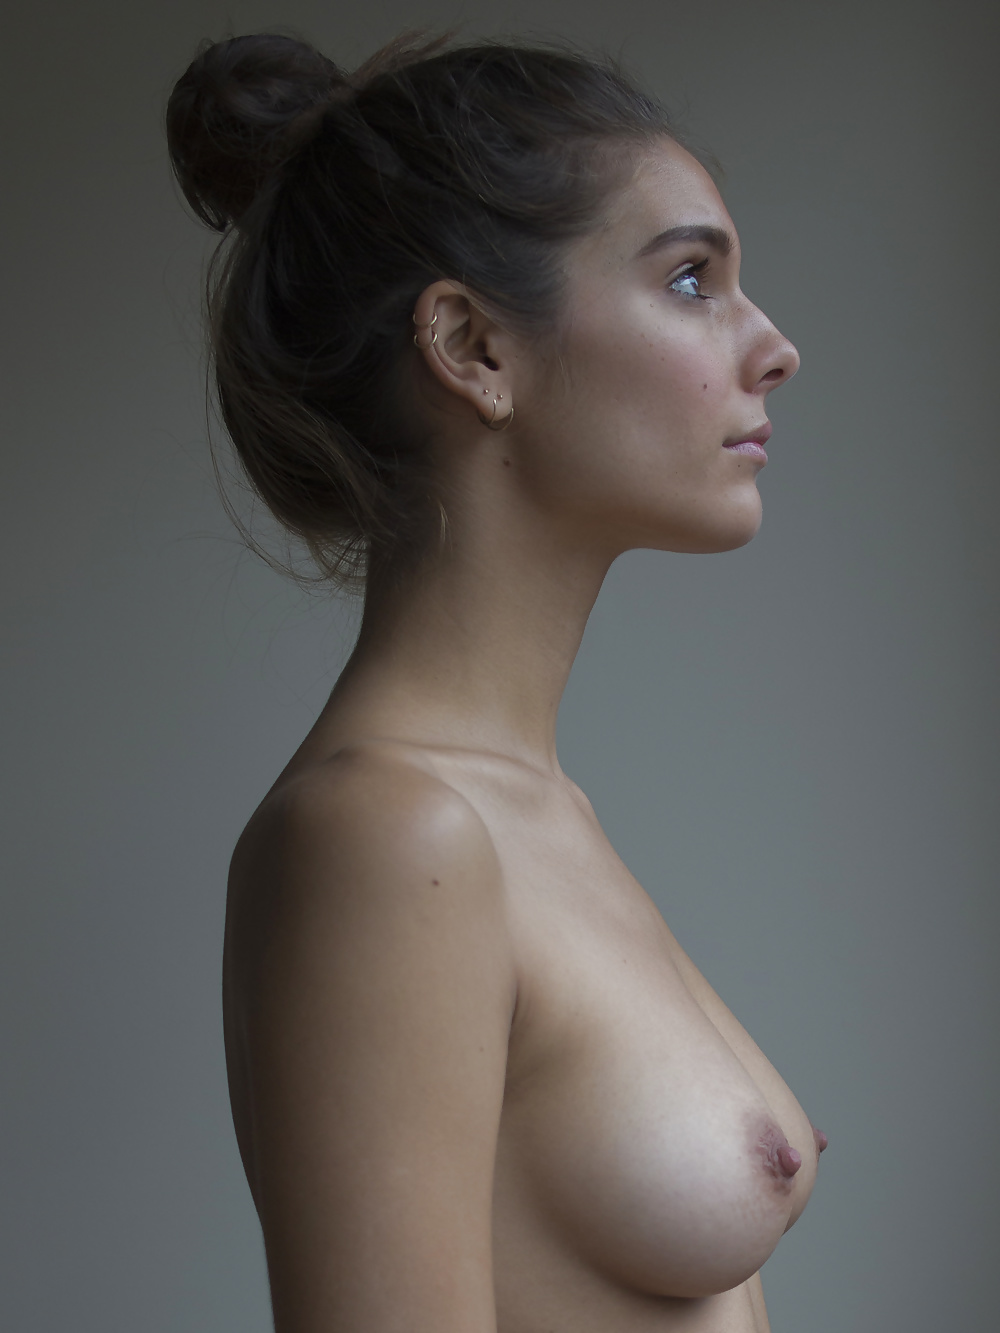 Caitlin Stasey naked (ex neighbours actress)
 #40621058